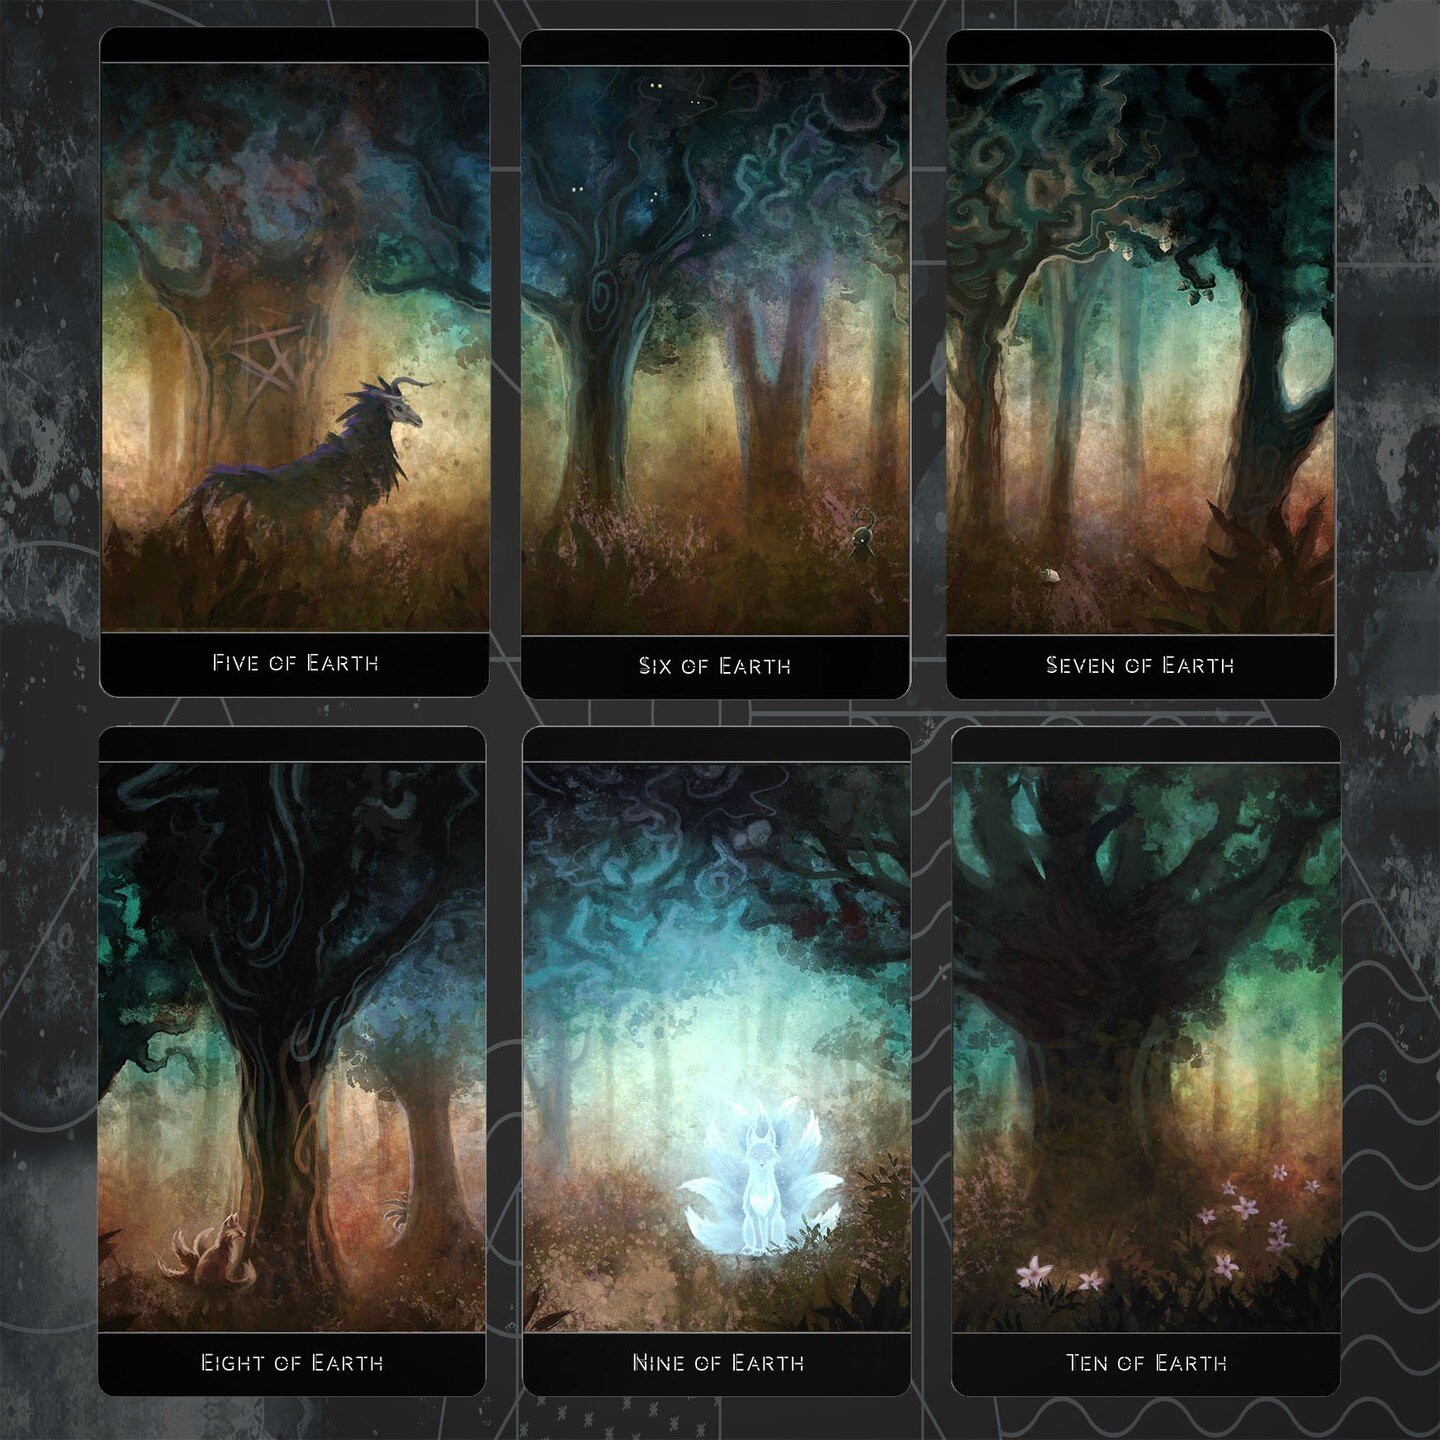 And the Earth suit, which received some major changes, and is now my personal favorite. I love painting ghostly trees! Stay tuned for the kickstarter launch tomorrow.. #thelostforesttarot #lostforesttarot #indietarot #indietarotdeck #tarotkickstarter